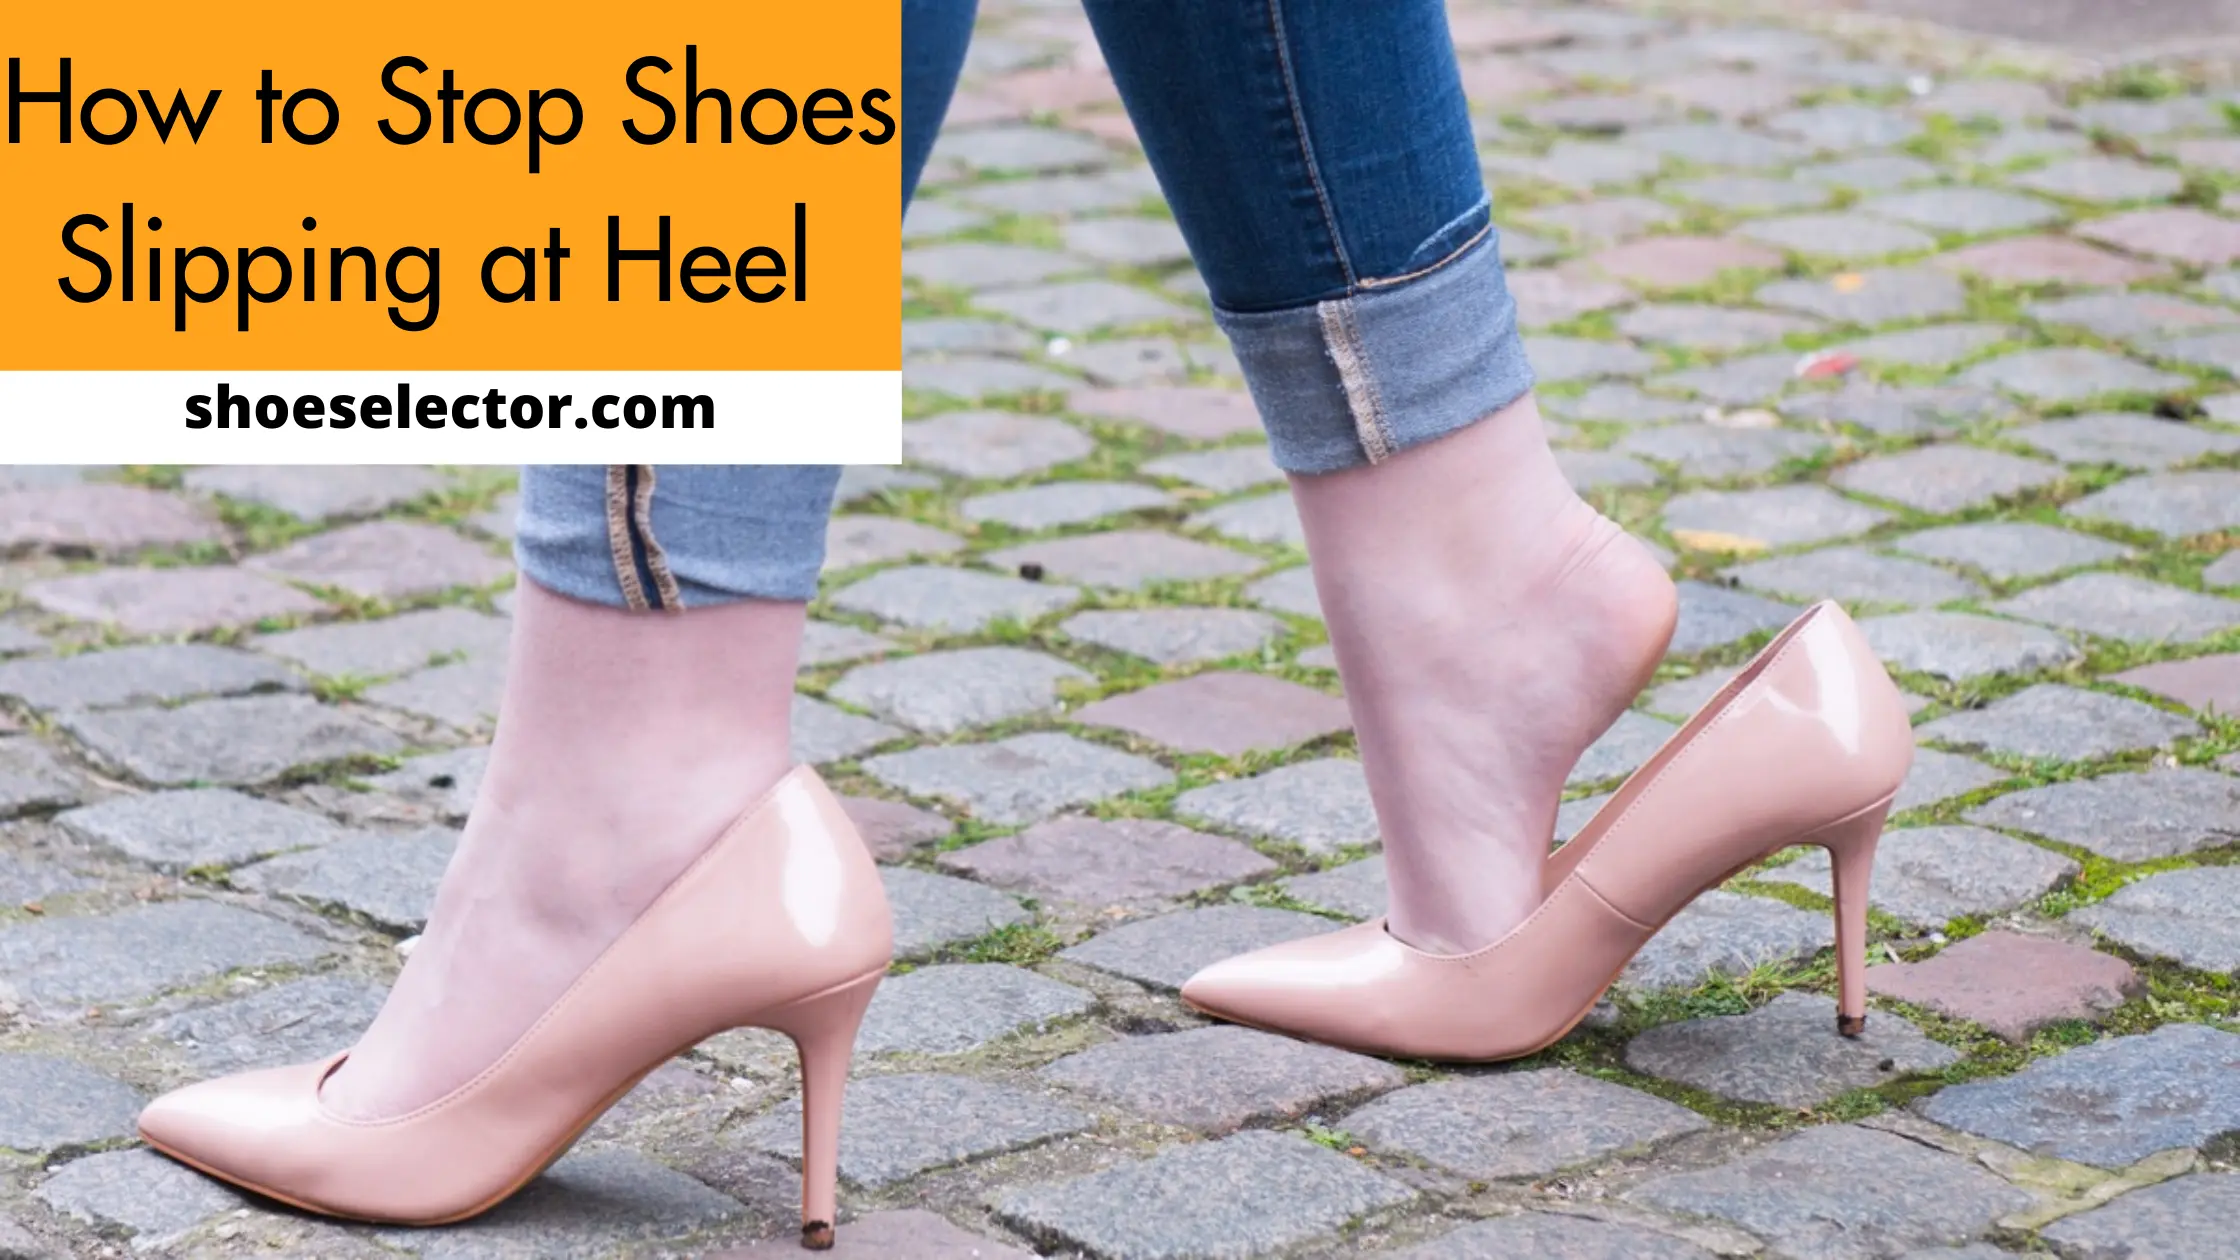 How to Stop Shoes Slipping at Heel? With Tips and Tricks